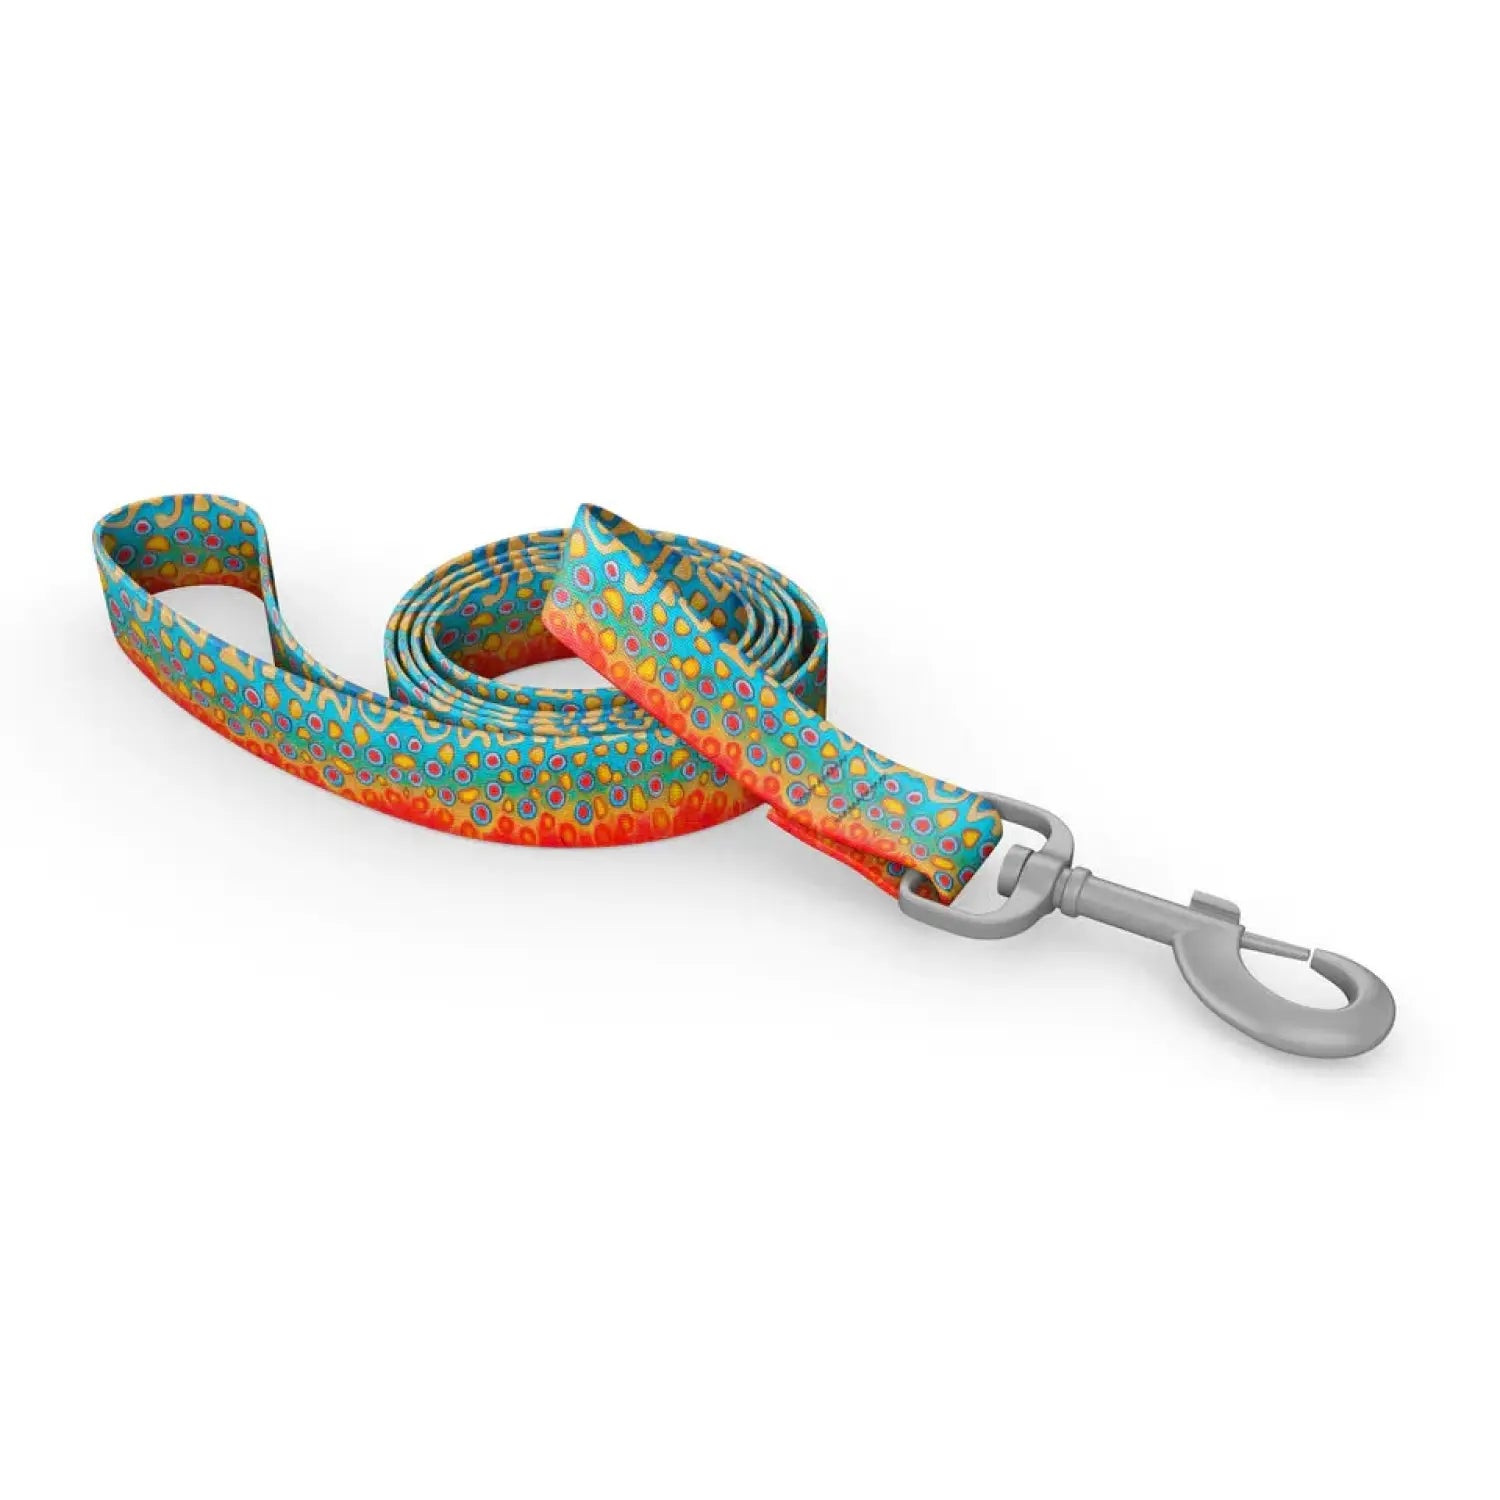 Wingo Outdoors Dog Leash in DeYoung Brook Trout design. Bright oranges , yellow, and aquas